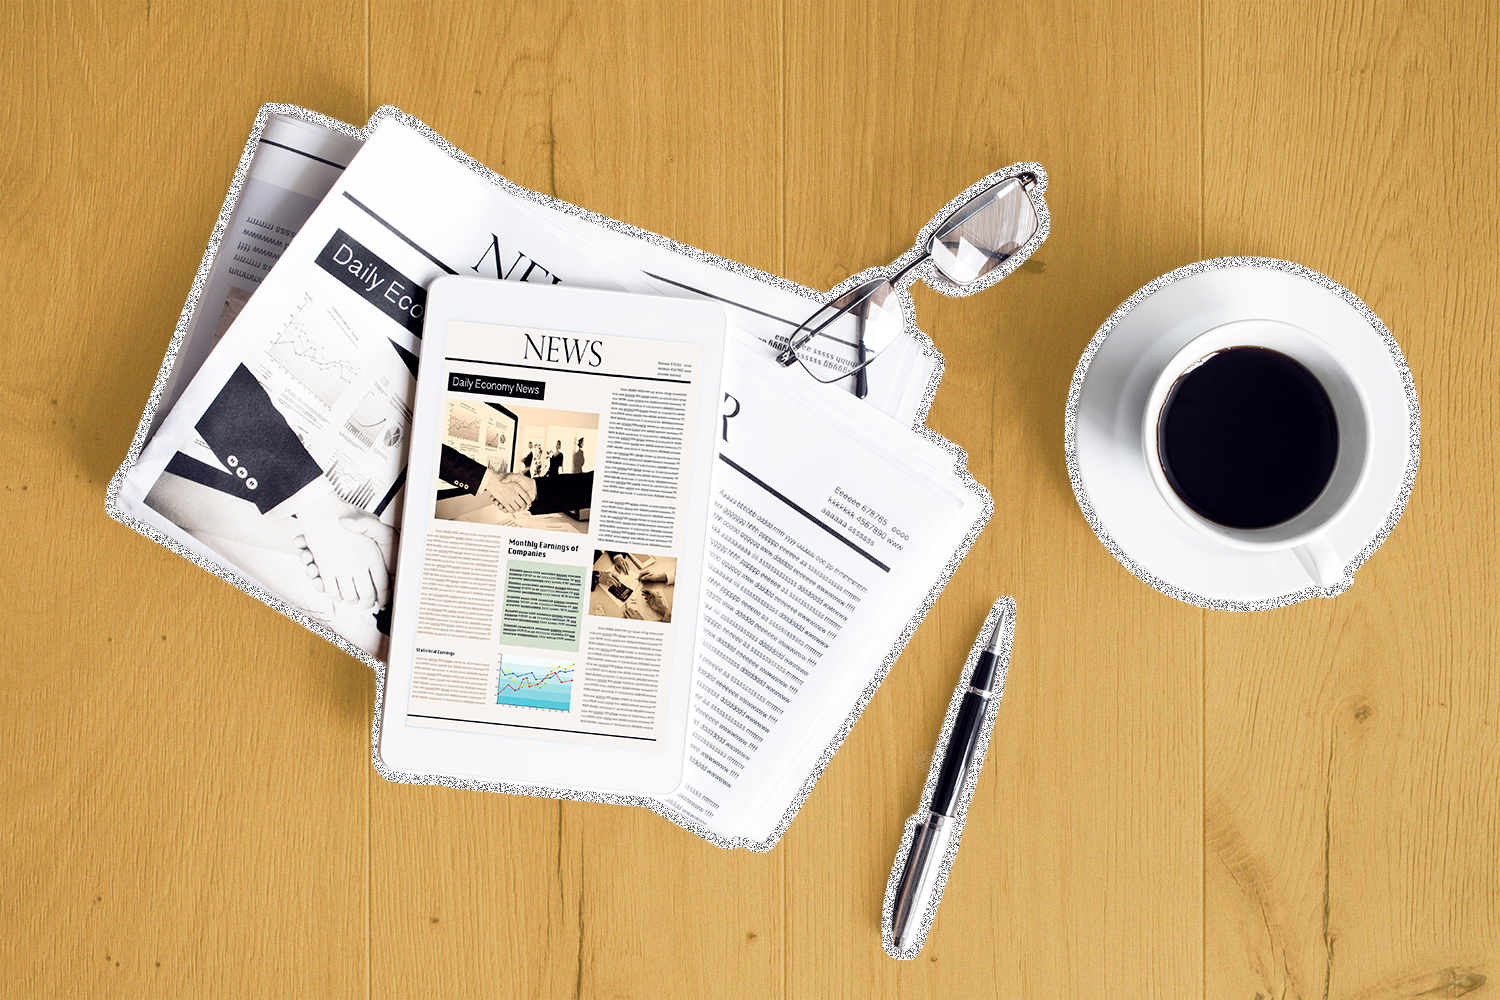 A wooden table with a newspaper, a tablet displaying news stories, eyeglasses, a pen, and a coffee mug.